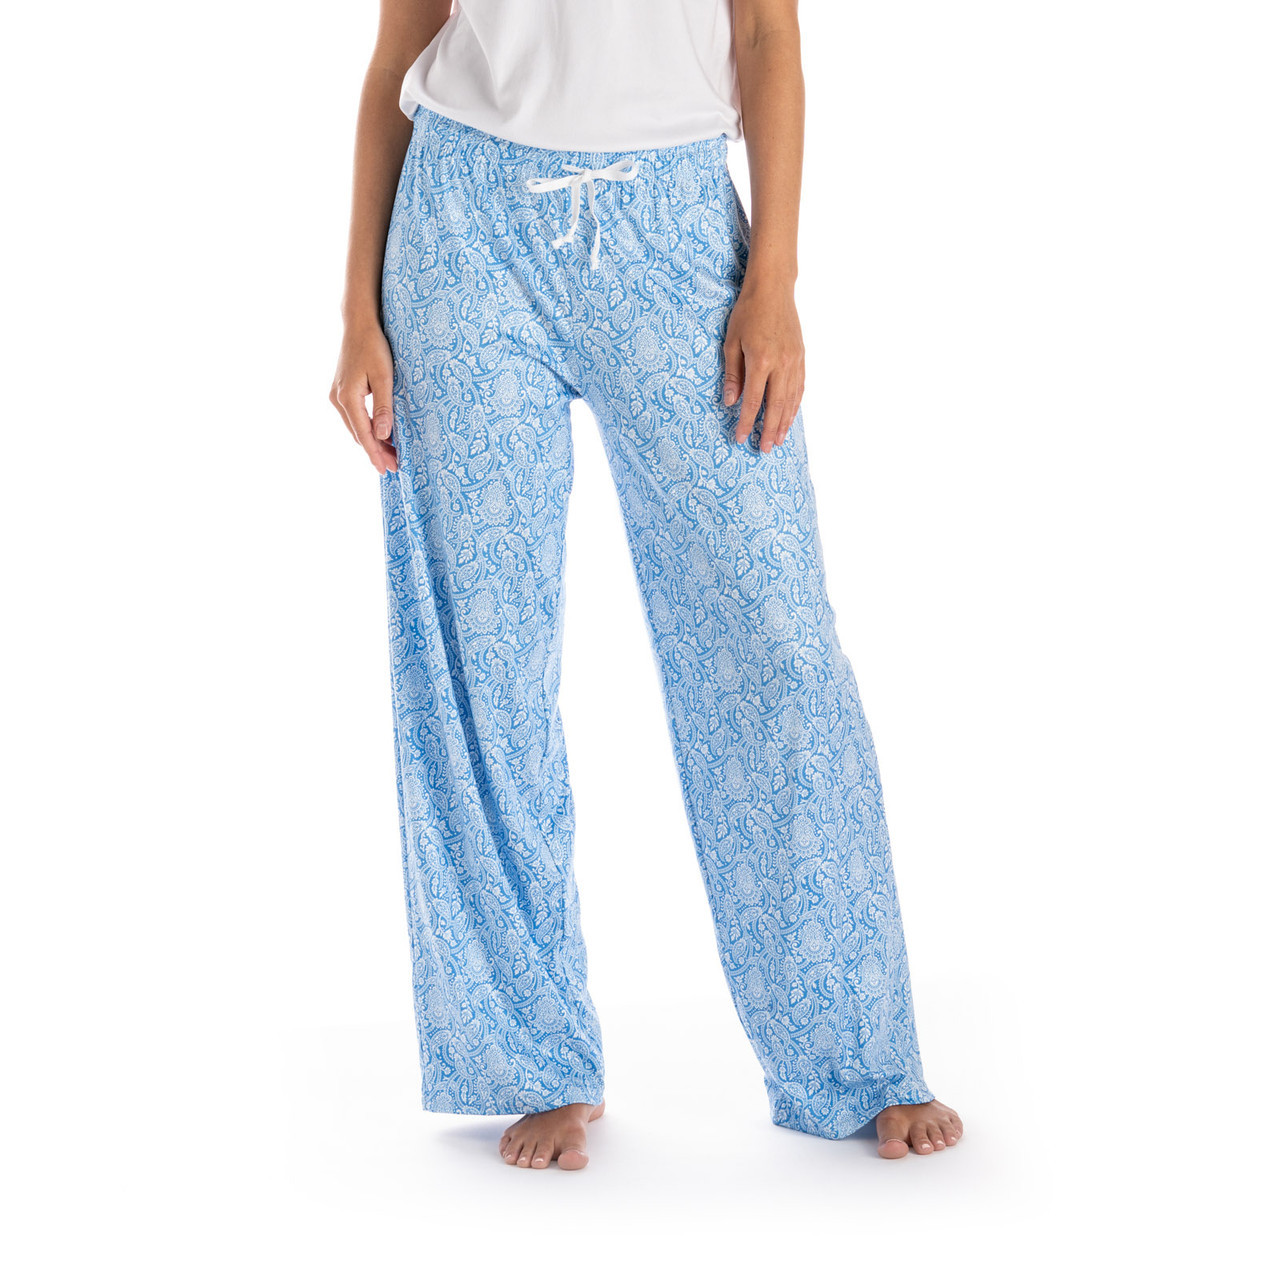  Chamllymers Women's Cotton Pajama Pants Comfy Stretch Pj Bottoms  Pants Sleep Lounge Long Pant Light blue M : Clothing, Shoes & Jewelry